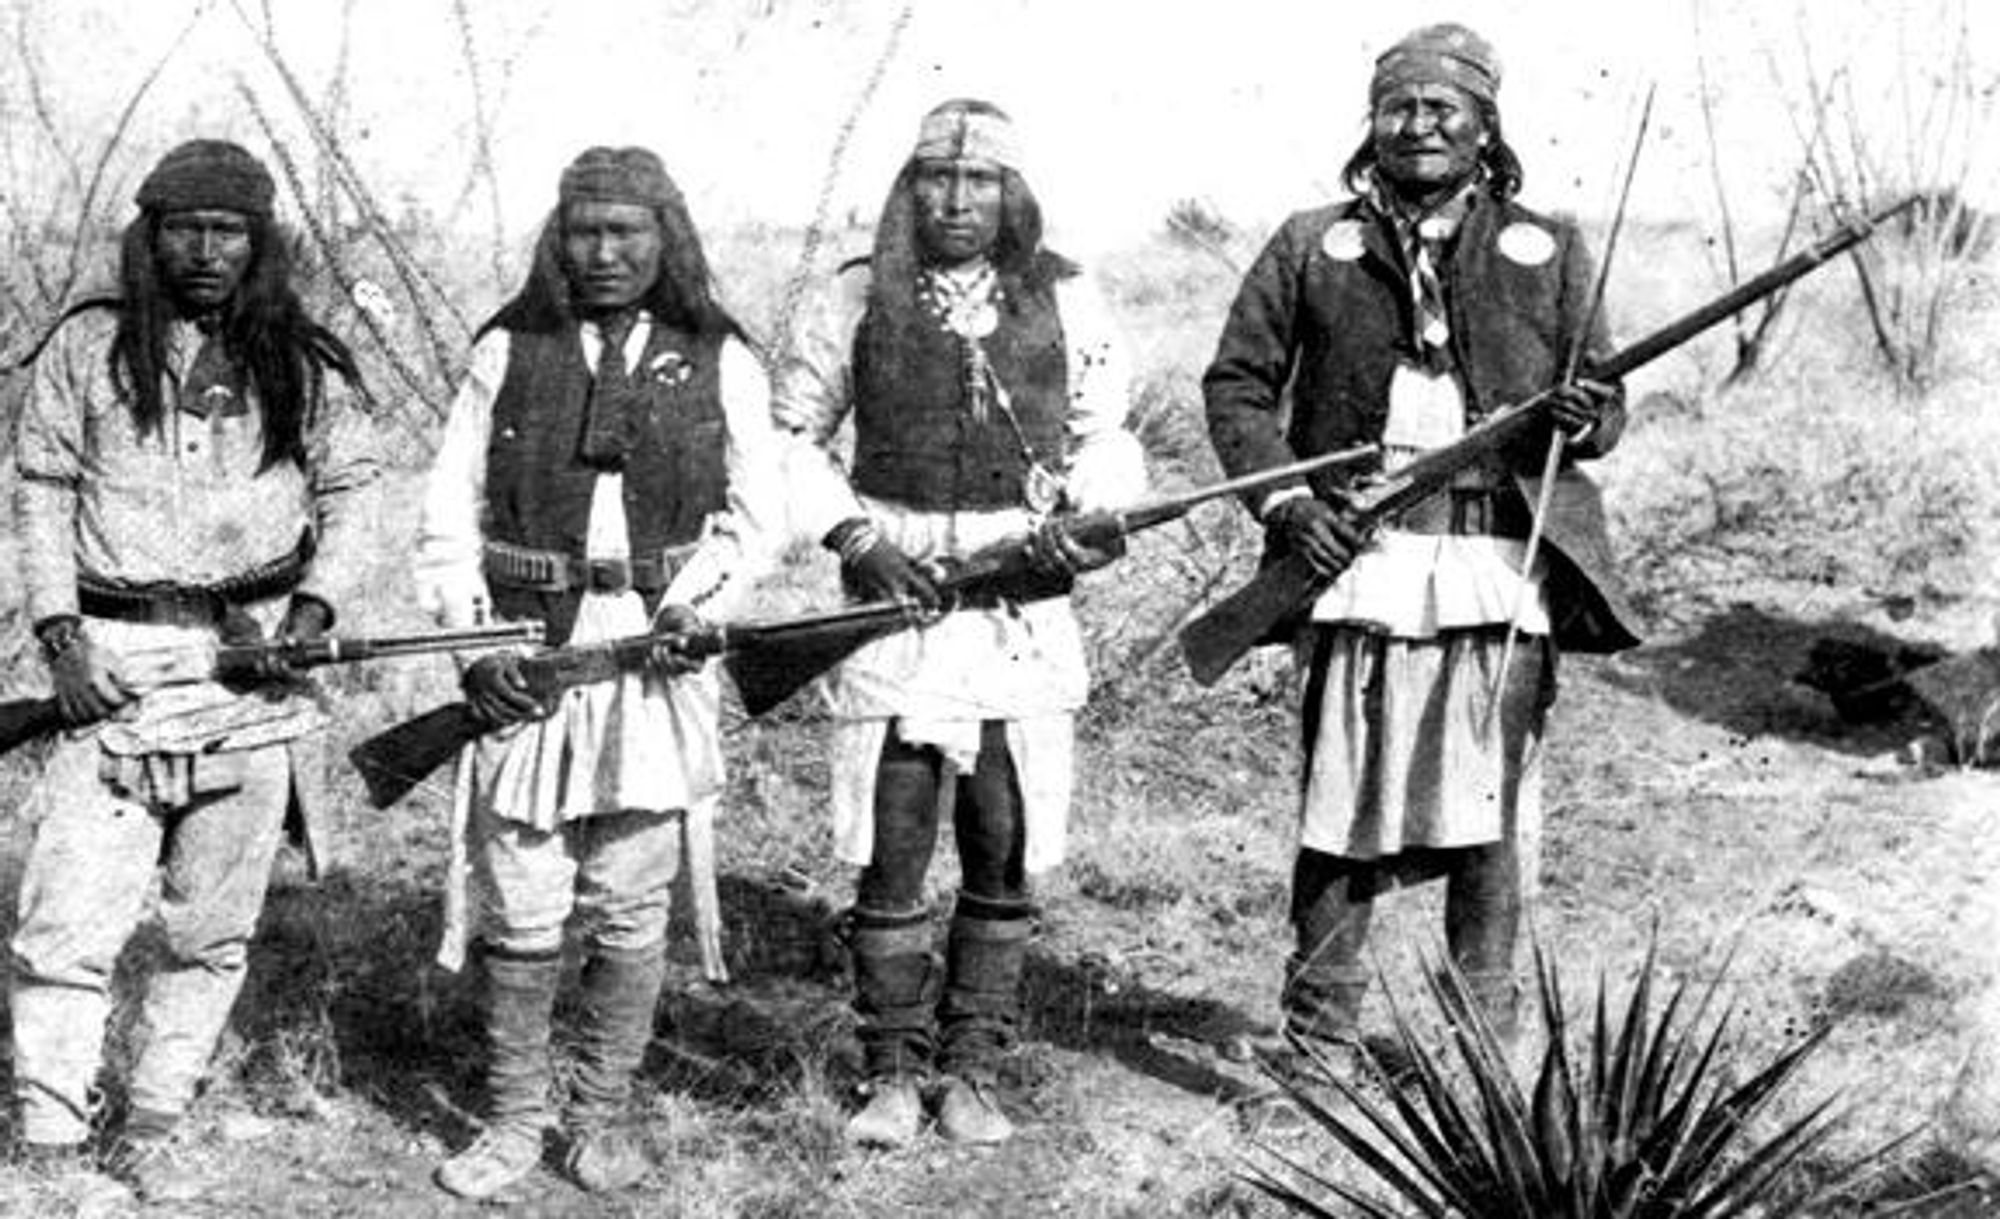 Captioned: "Geronimo, Yanozha (Geronimos´s brother-in-law), Chappo (Geronimo´s son by his second wife), and Fun (Yanozha´s half brother) (right to left) in 1886." Photo by C. S. Fly